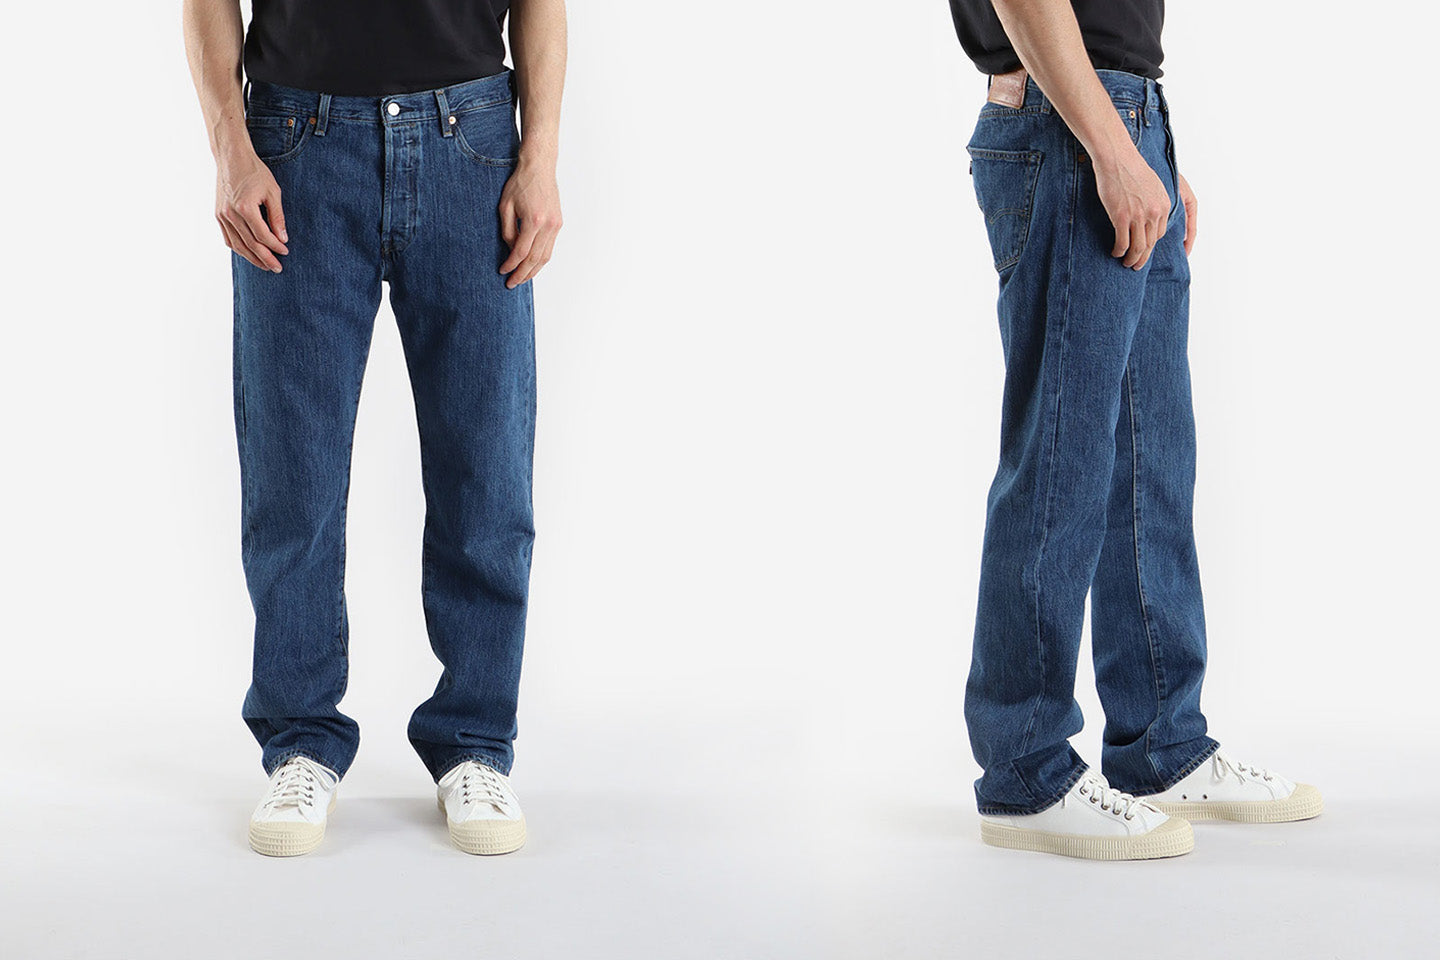 Levi's Fit Guide | do Levi's Jeans – Urban